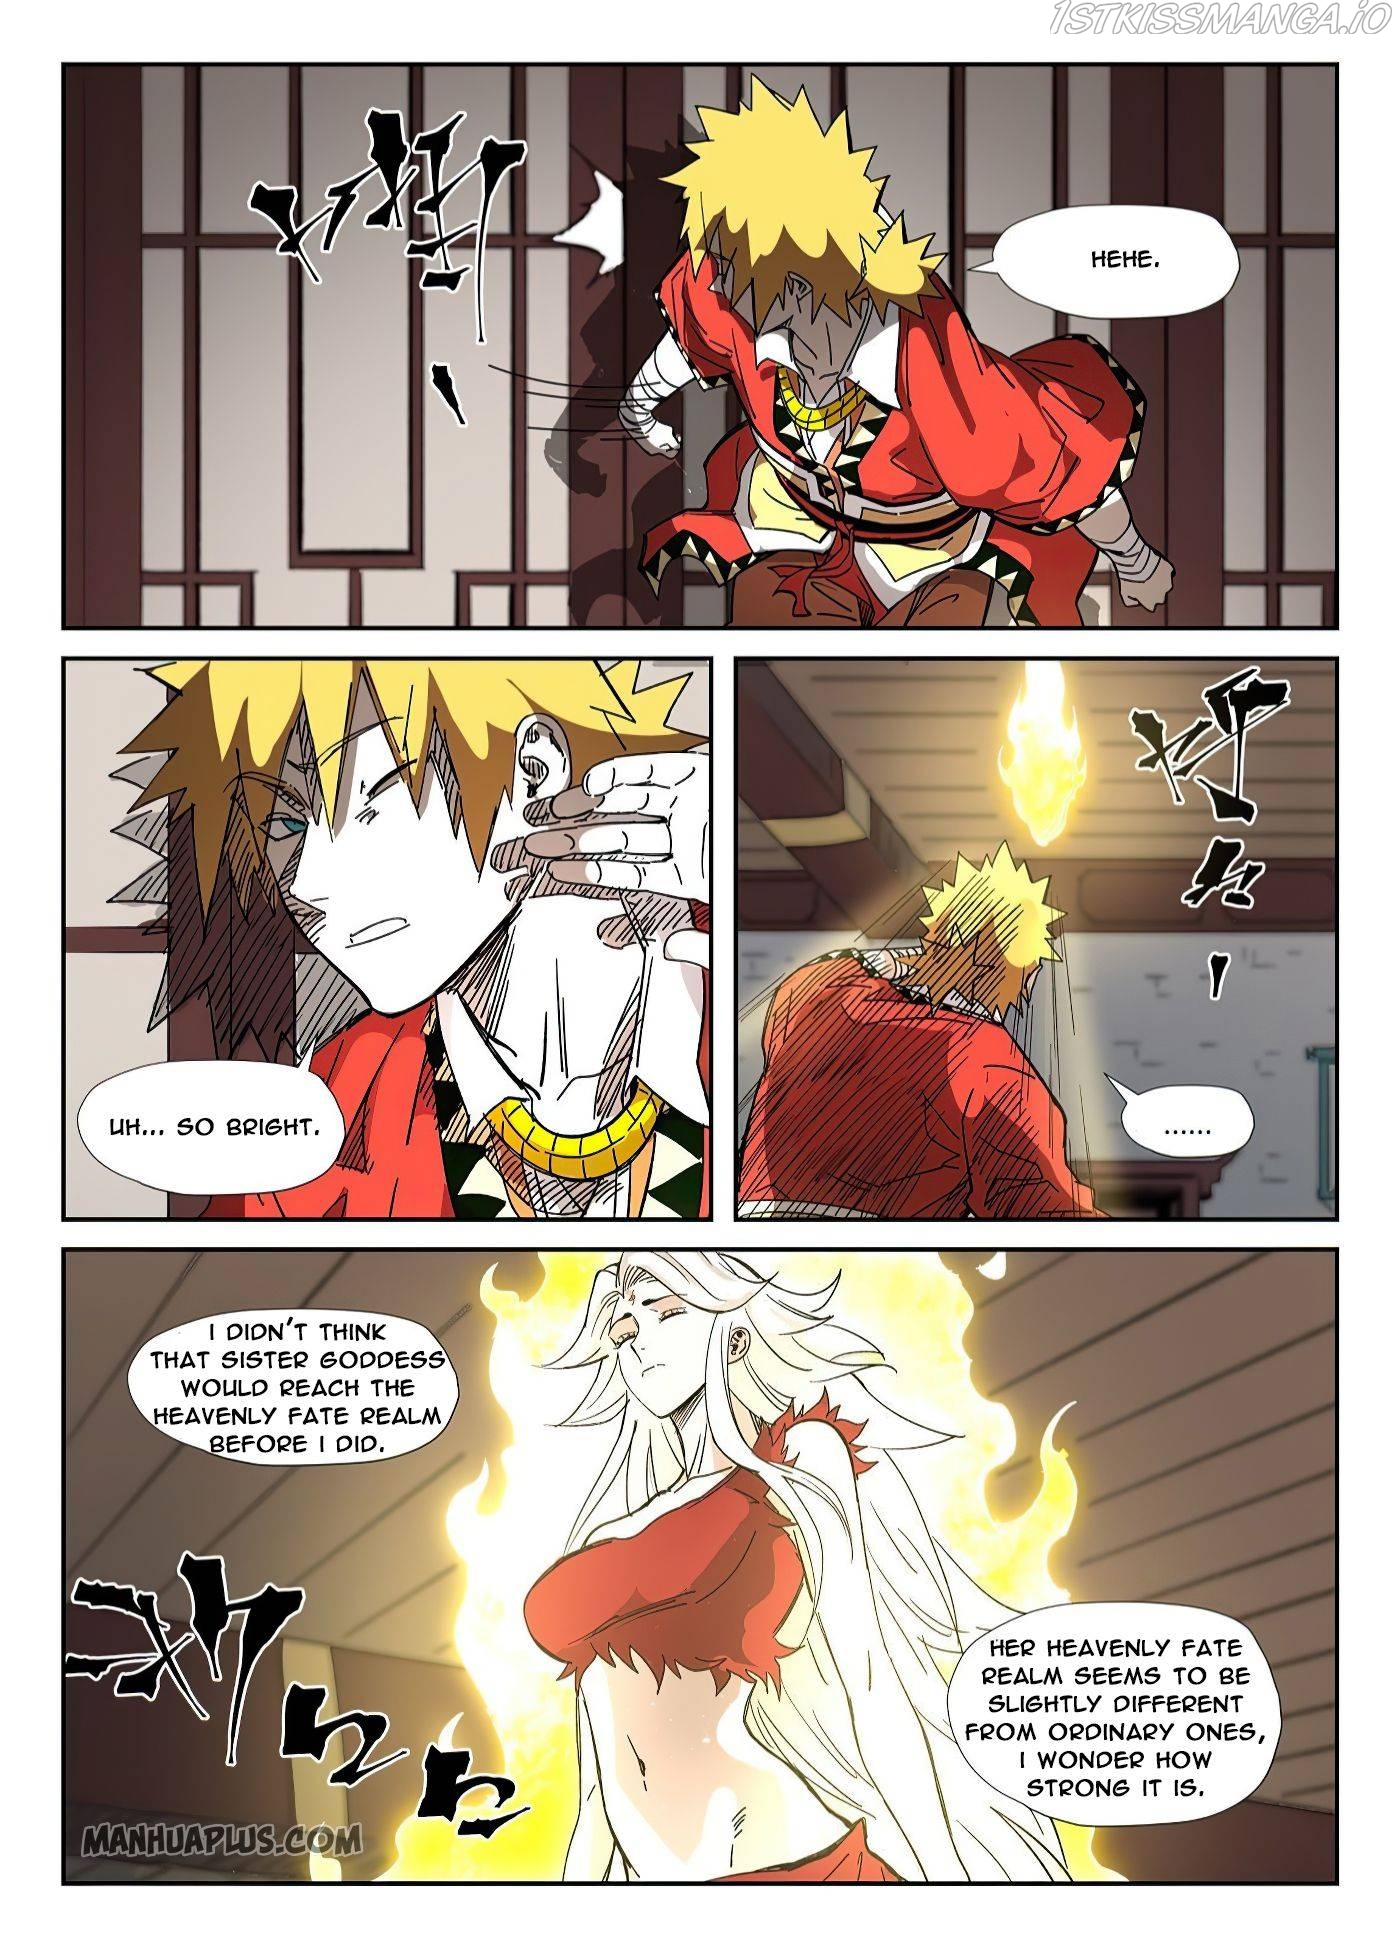 Tales of Demons and Gods Manhua Chapter 330.5 - Page 4